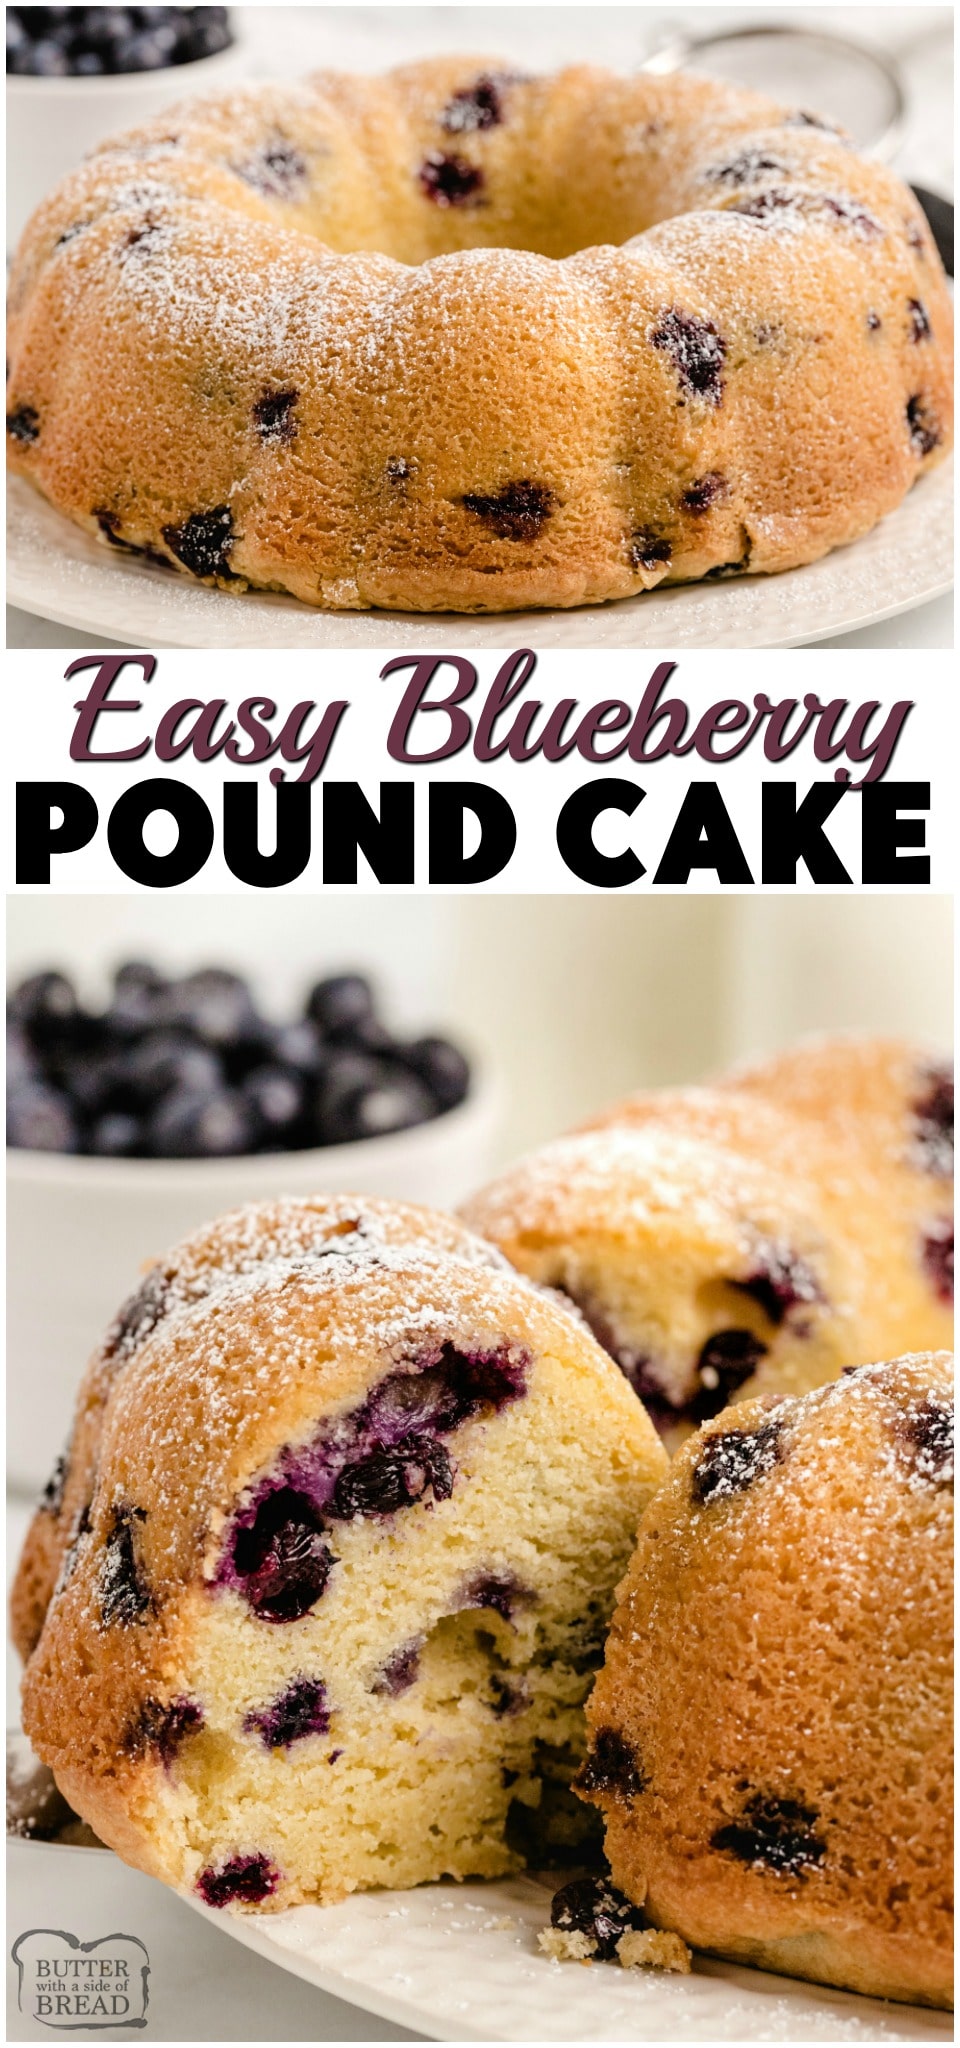 Blueberry Pound Cake make with butter, sugar and fresh blueberries. Elegant pound cake recipe that sweet & tender with bright blueberry flavor & dusted with powdered sugar.